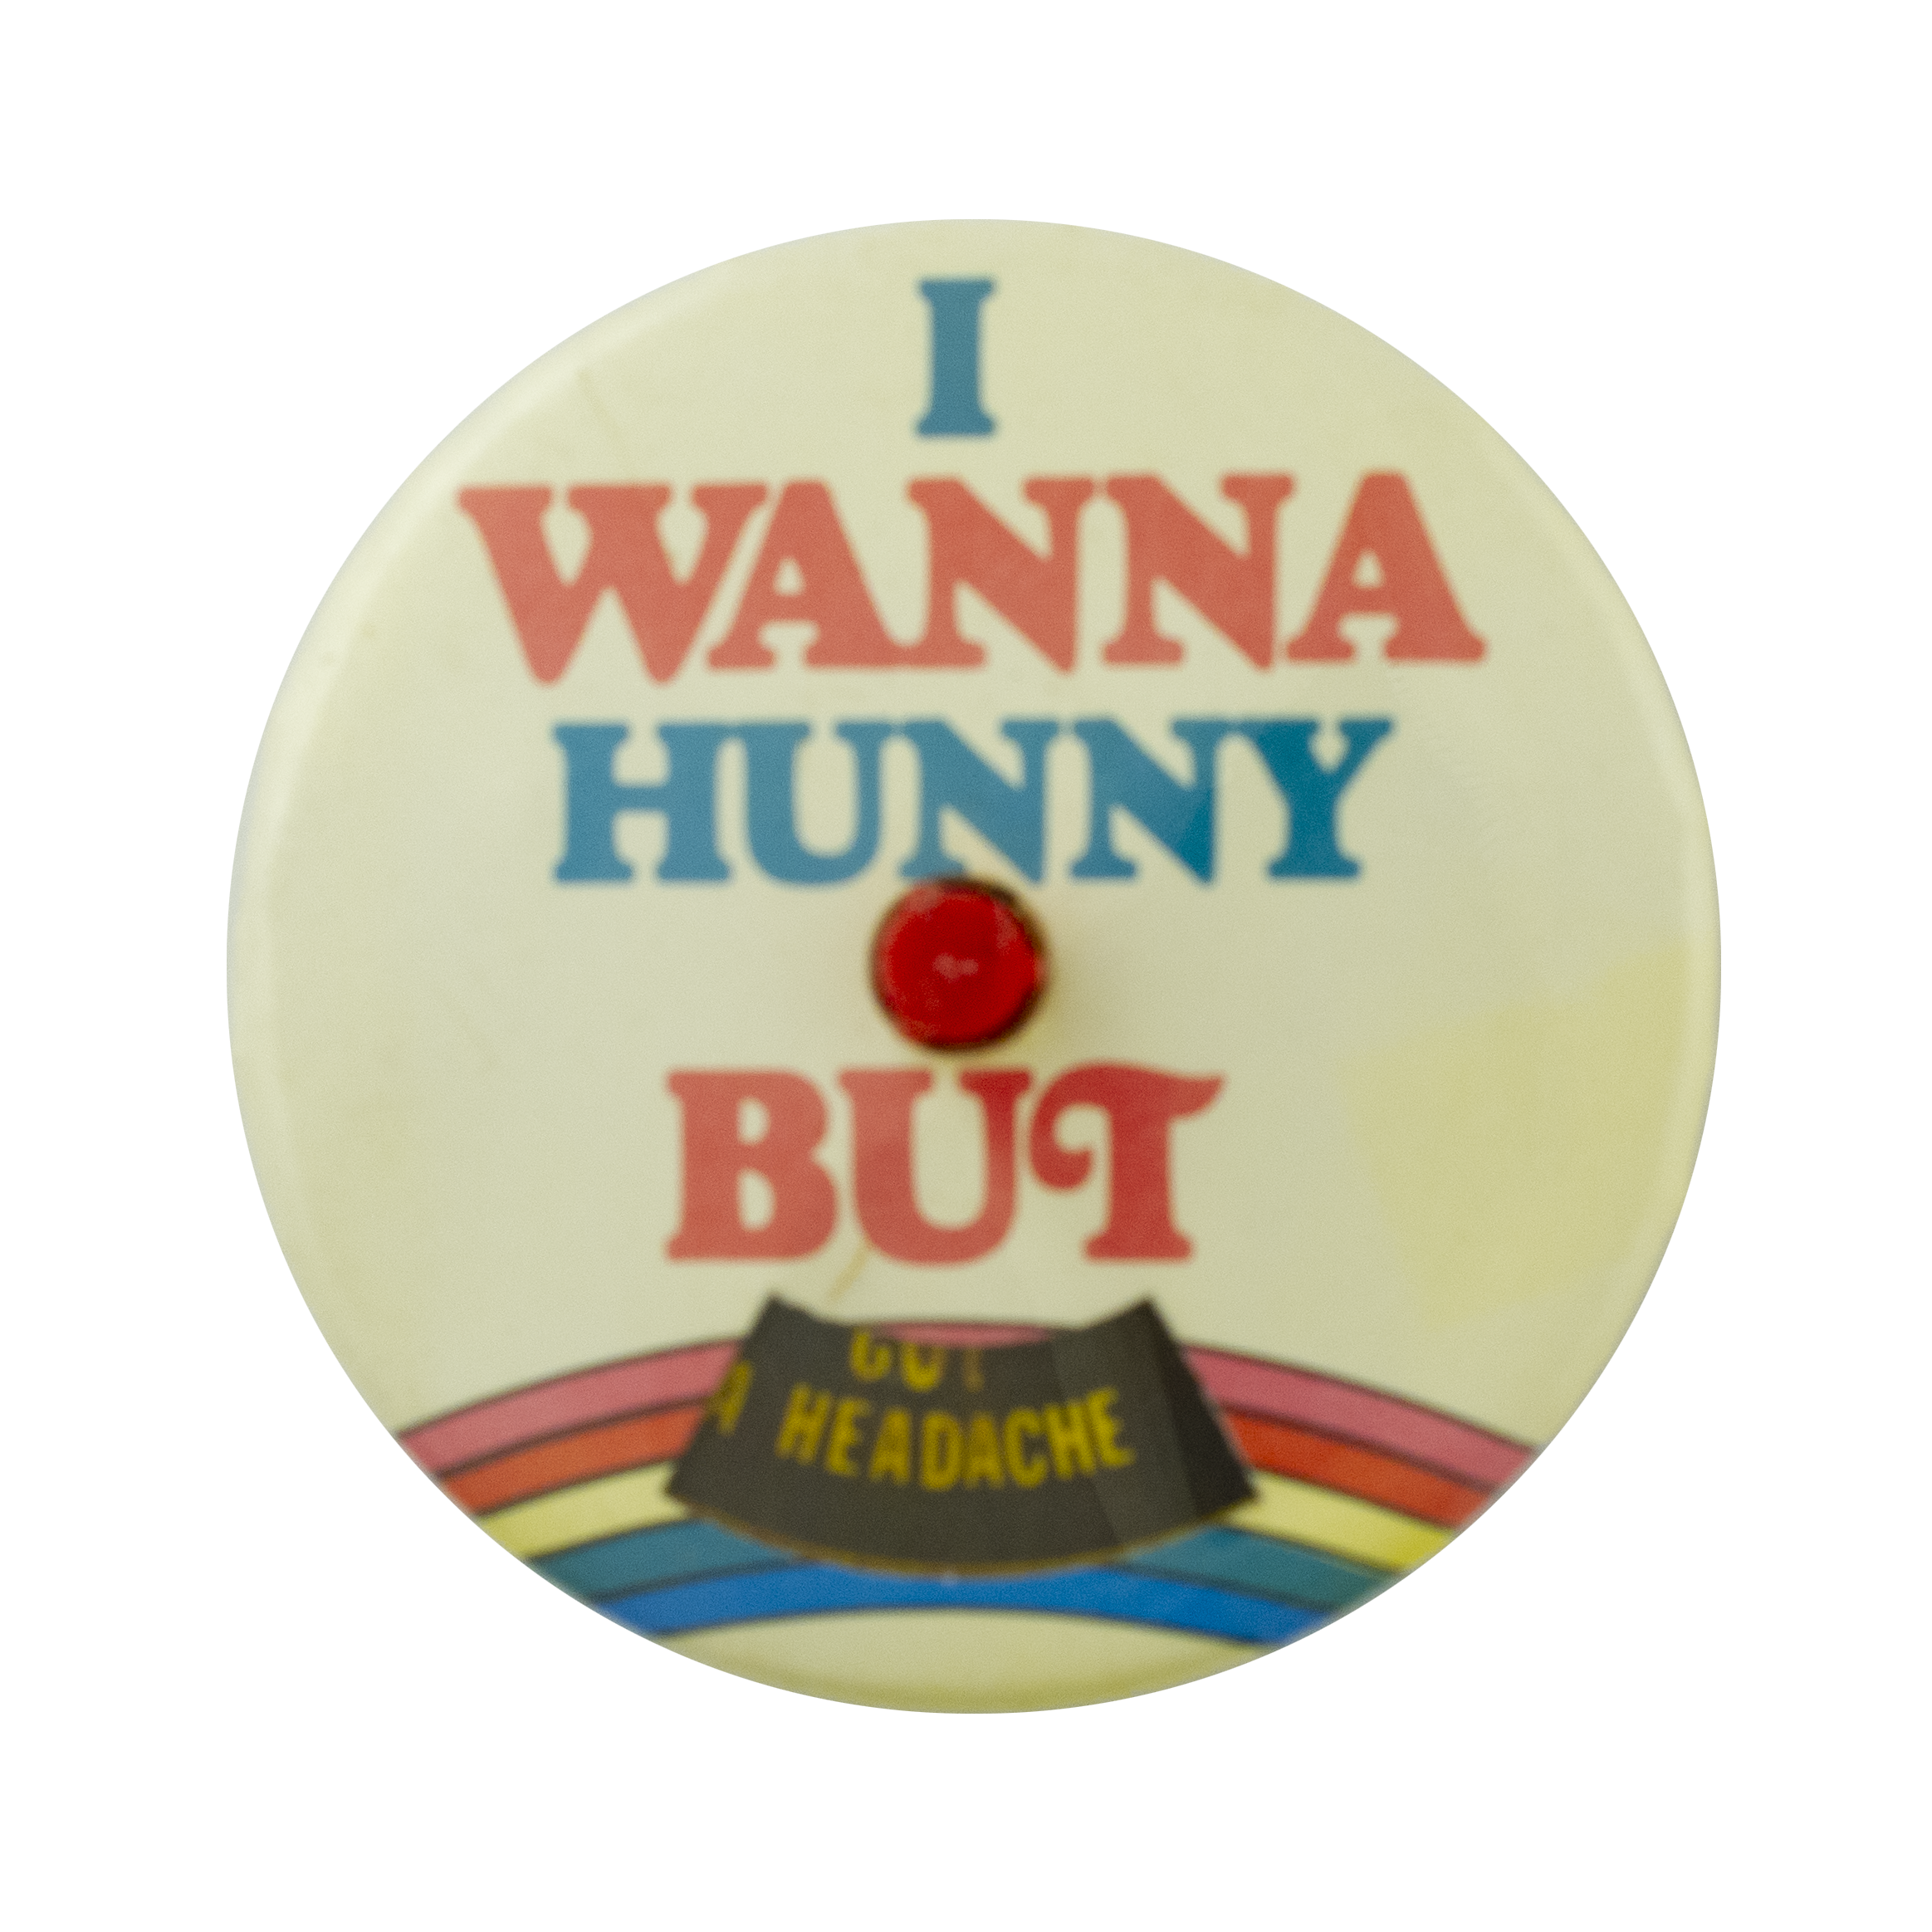 I Wanna Hunny But Innovative Busy Beaver Button Museum